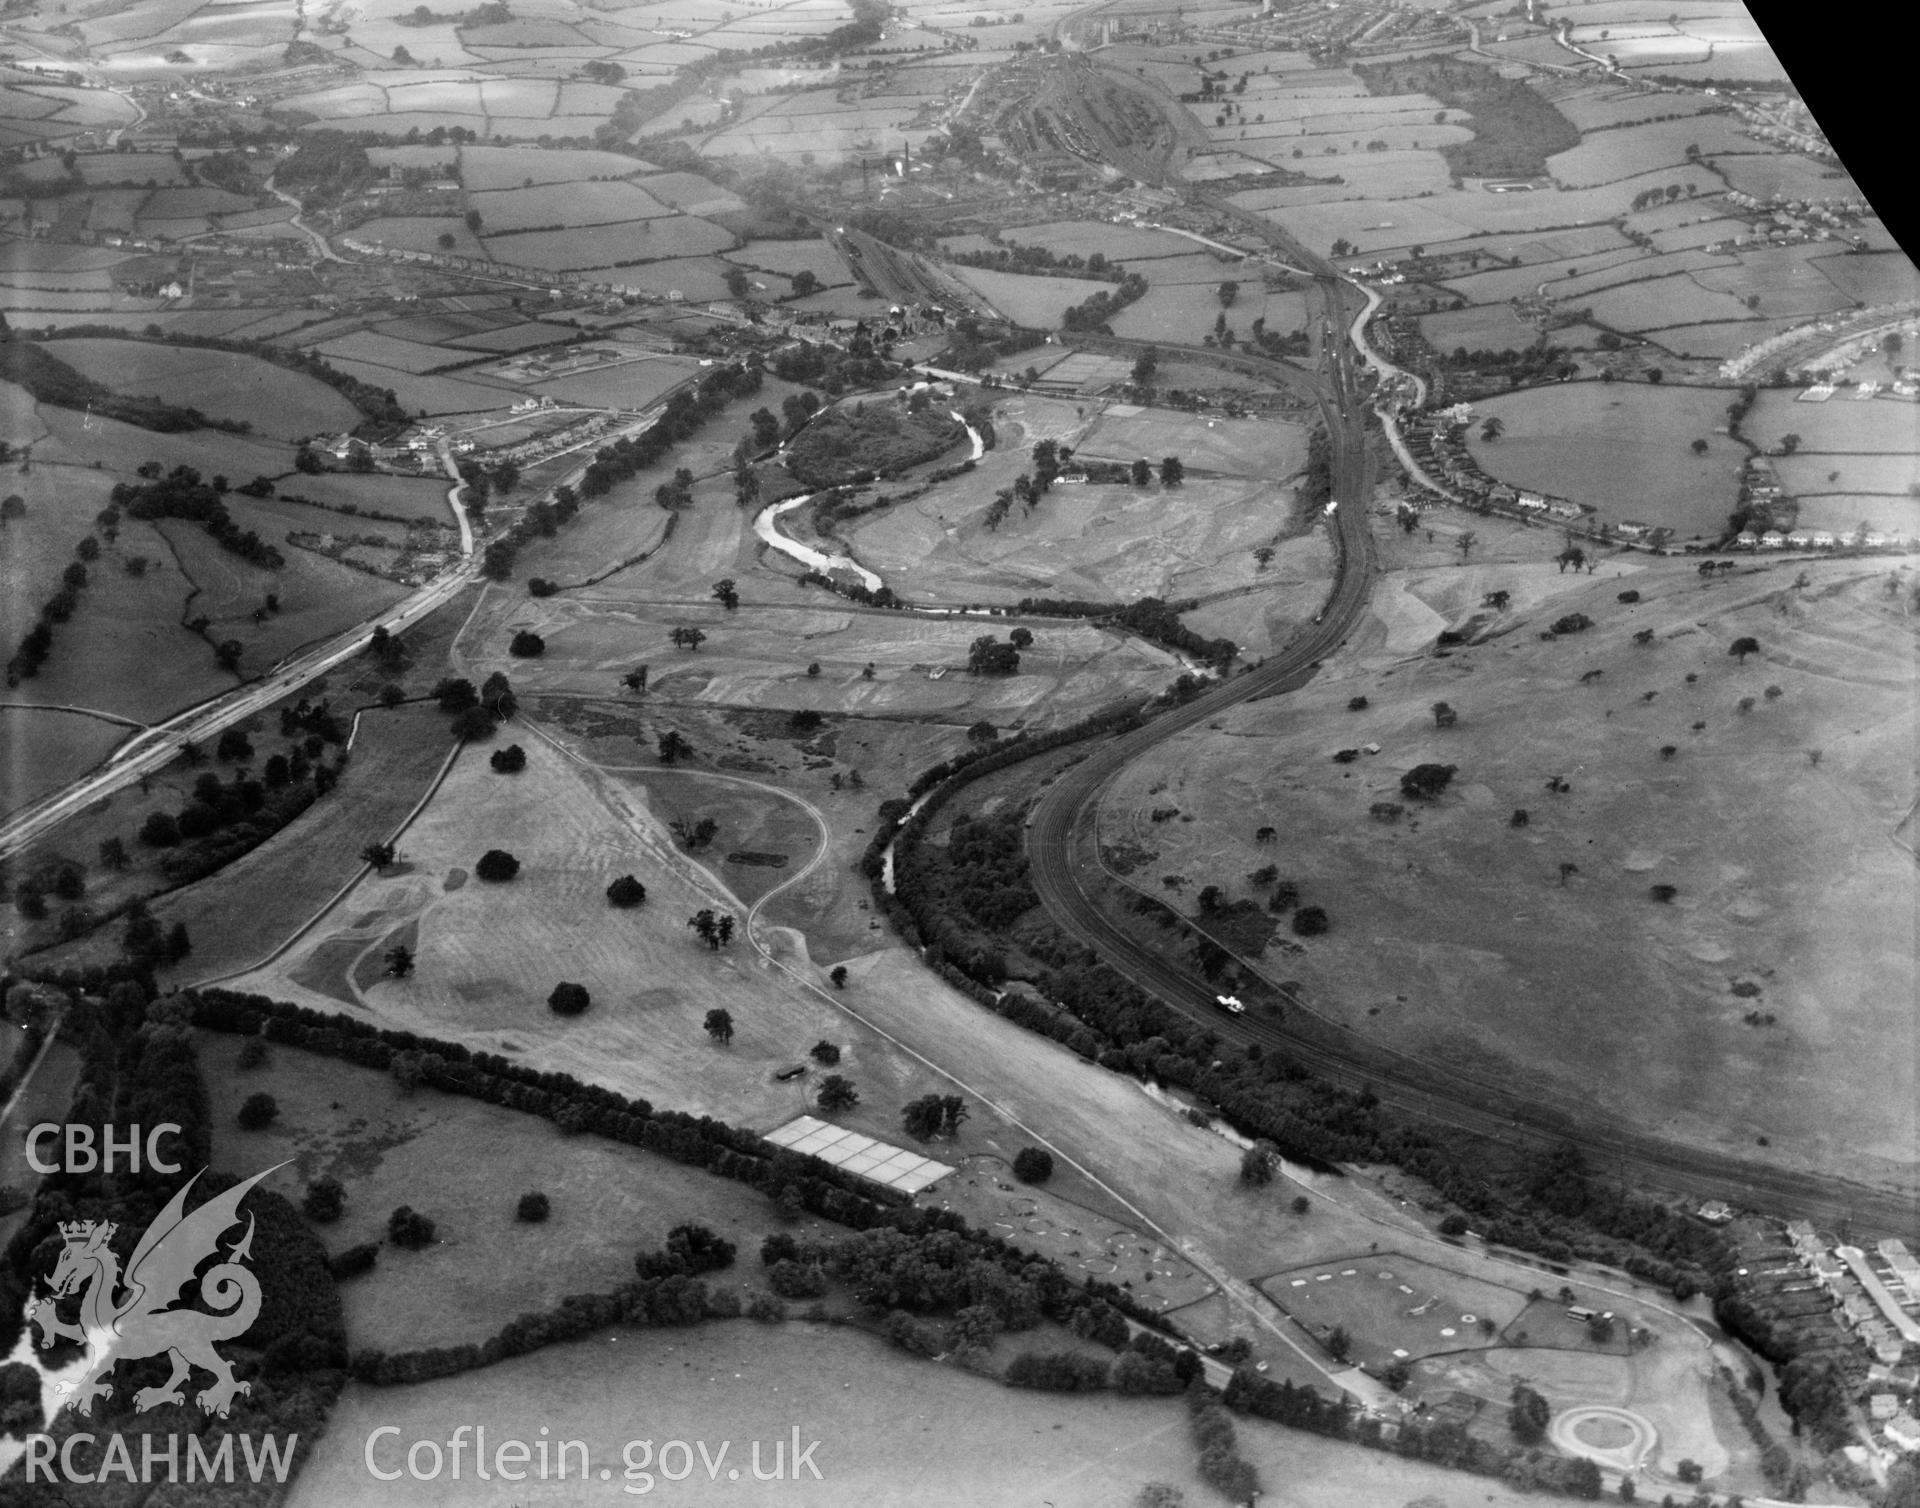 View of  Tredegar Park golf club, showing distant view of Rogerstone and Bassaleg, oblique aerial view. 5?x4? black and white glass plate negative.